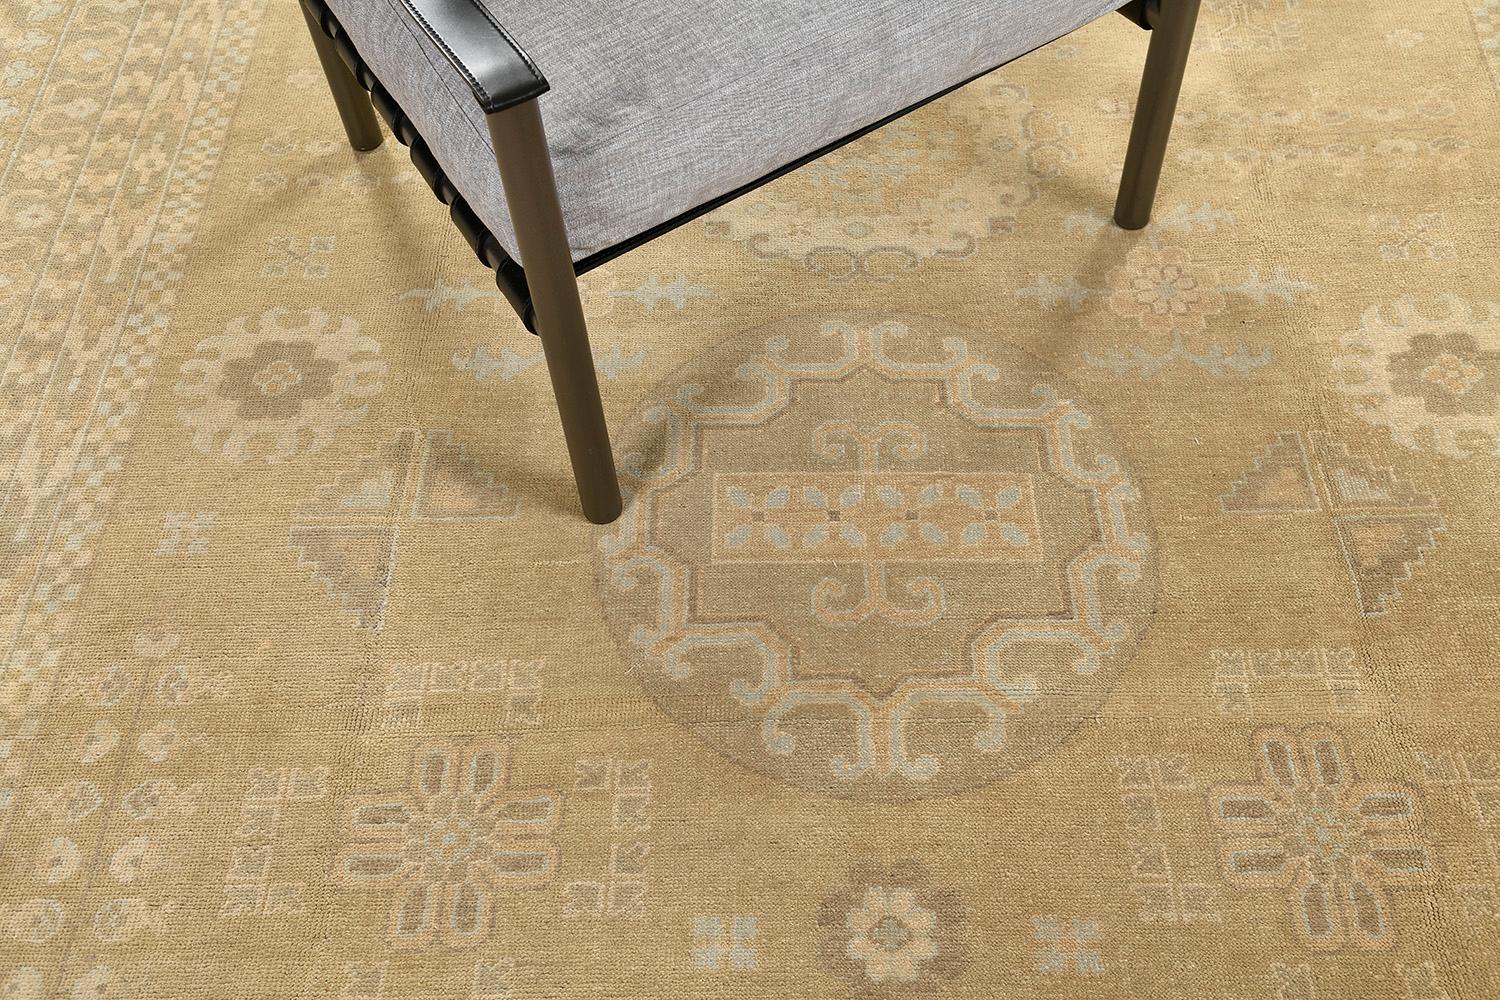 An impressive hand-spun wool Khotan design revival from our collection has come and flexed its versatility. This rug is flexible for any home interior decor. Stylized motifs and grandiose medallions over a camel field and ivory outline manifest the